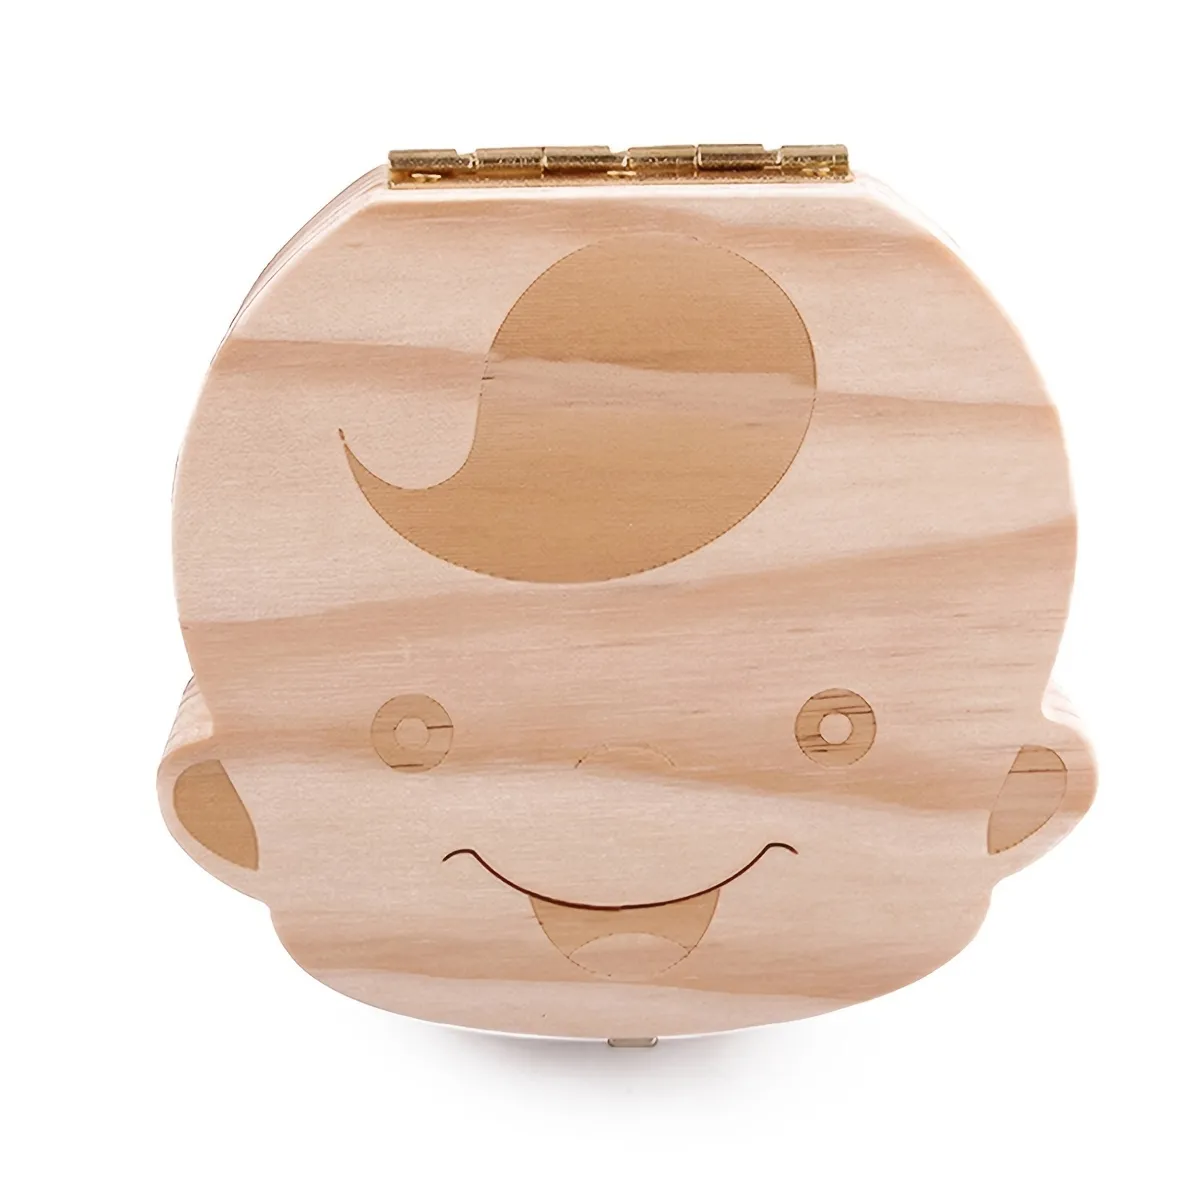 Wooden Baby Tooth Box Keepsake Tooth Organizer Storage Container for Teeth & Lanugo & Umbilical Cord